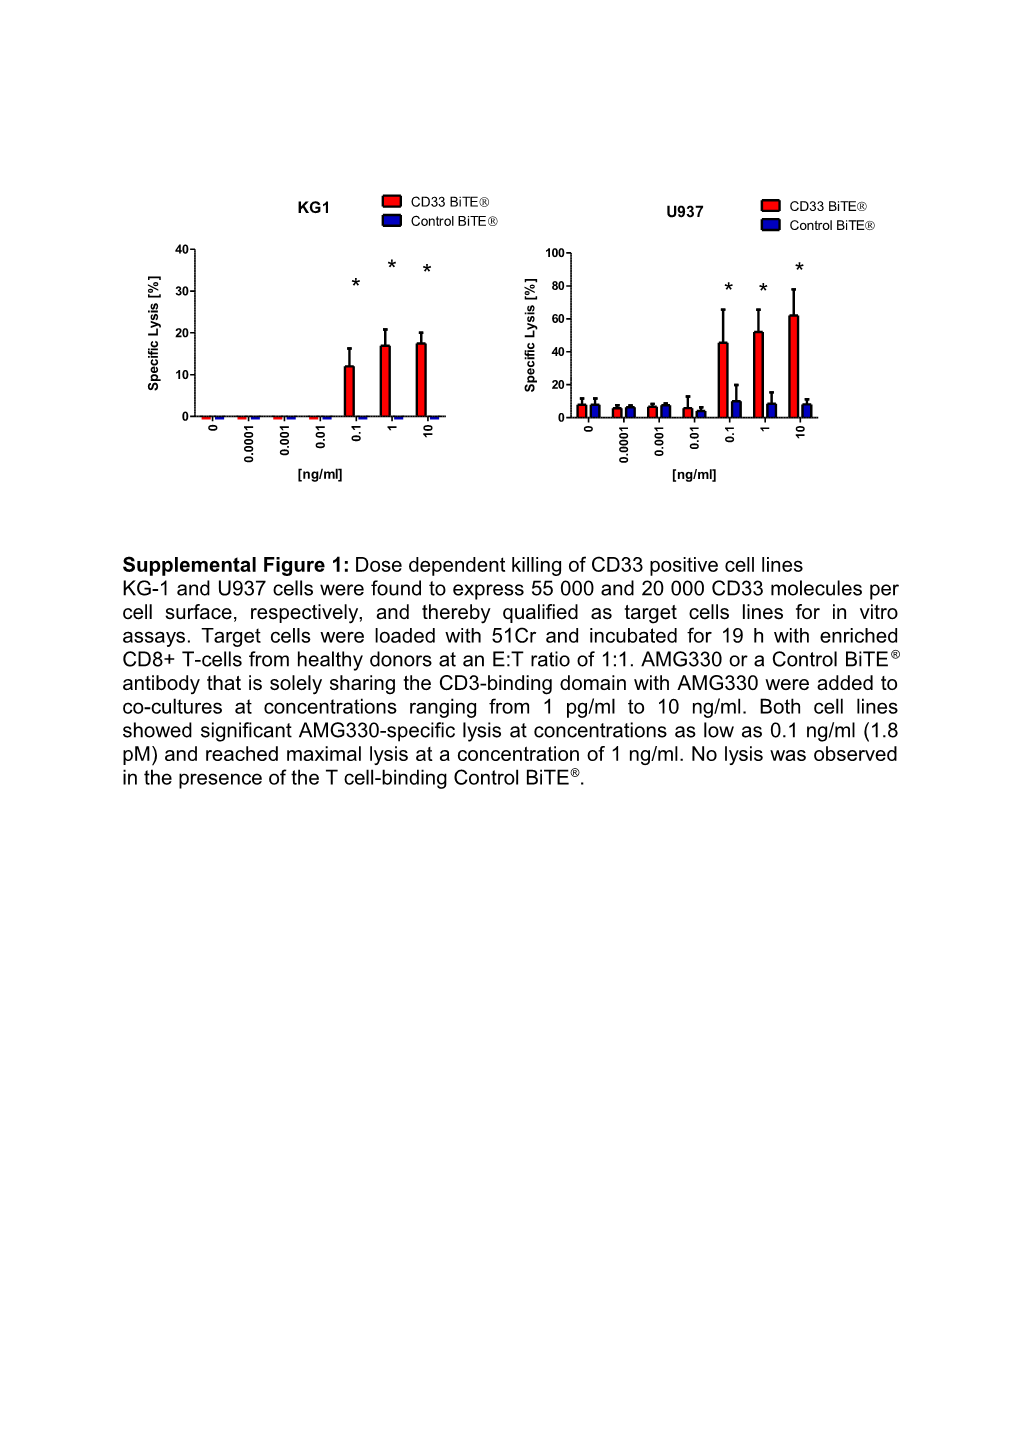 Supplemental Figure1 :Dose Dependent Killing of CD33 Positive Cell Lines